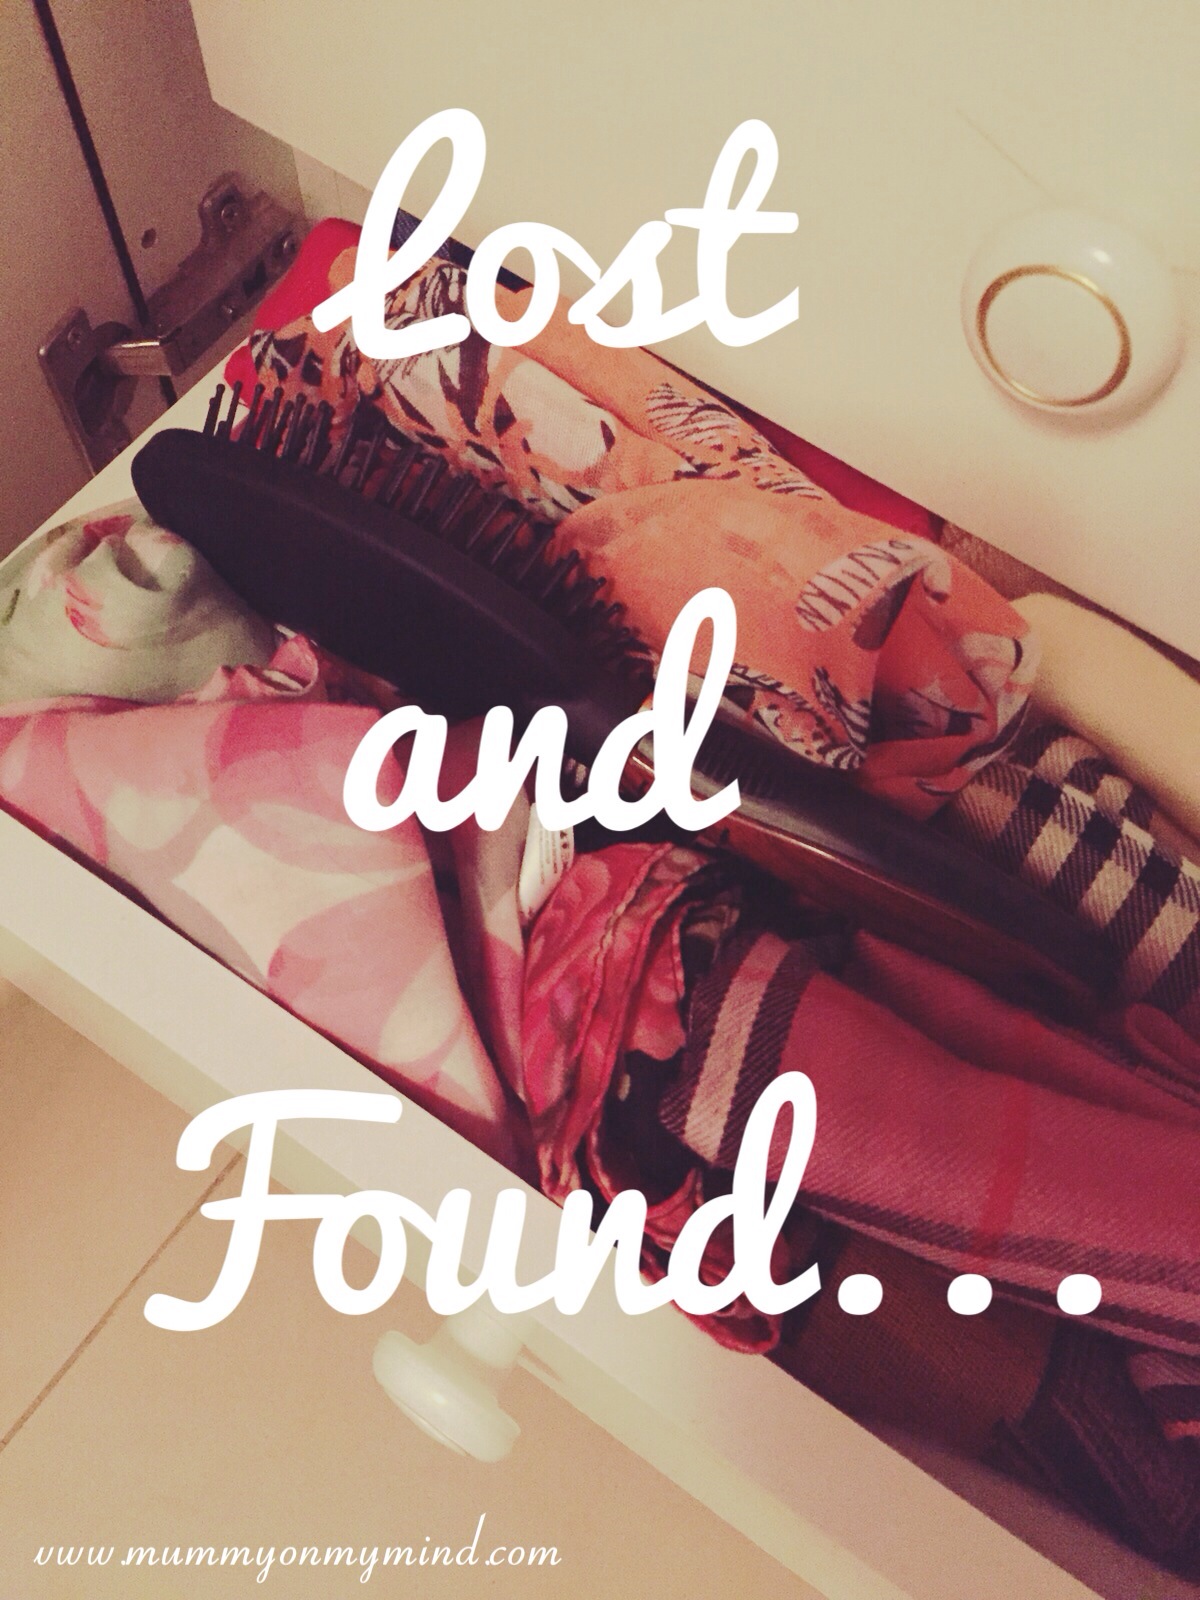 Lost and Found…